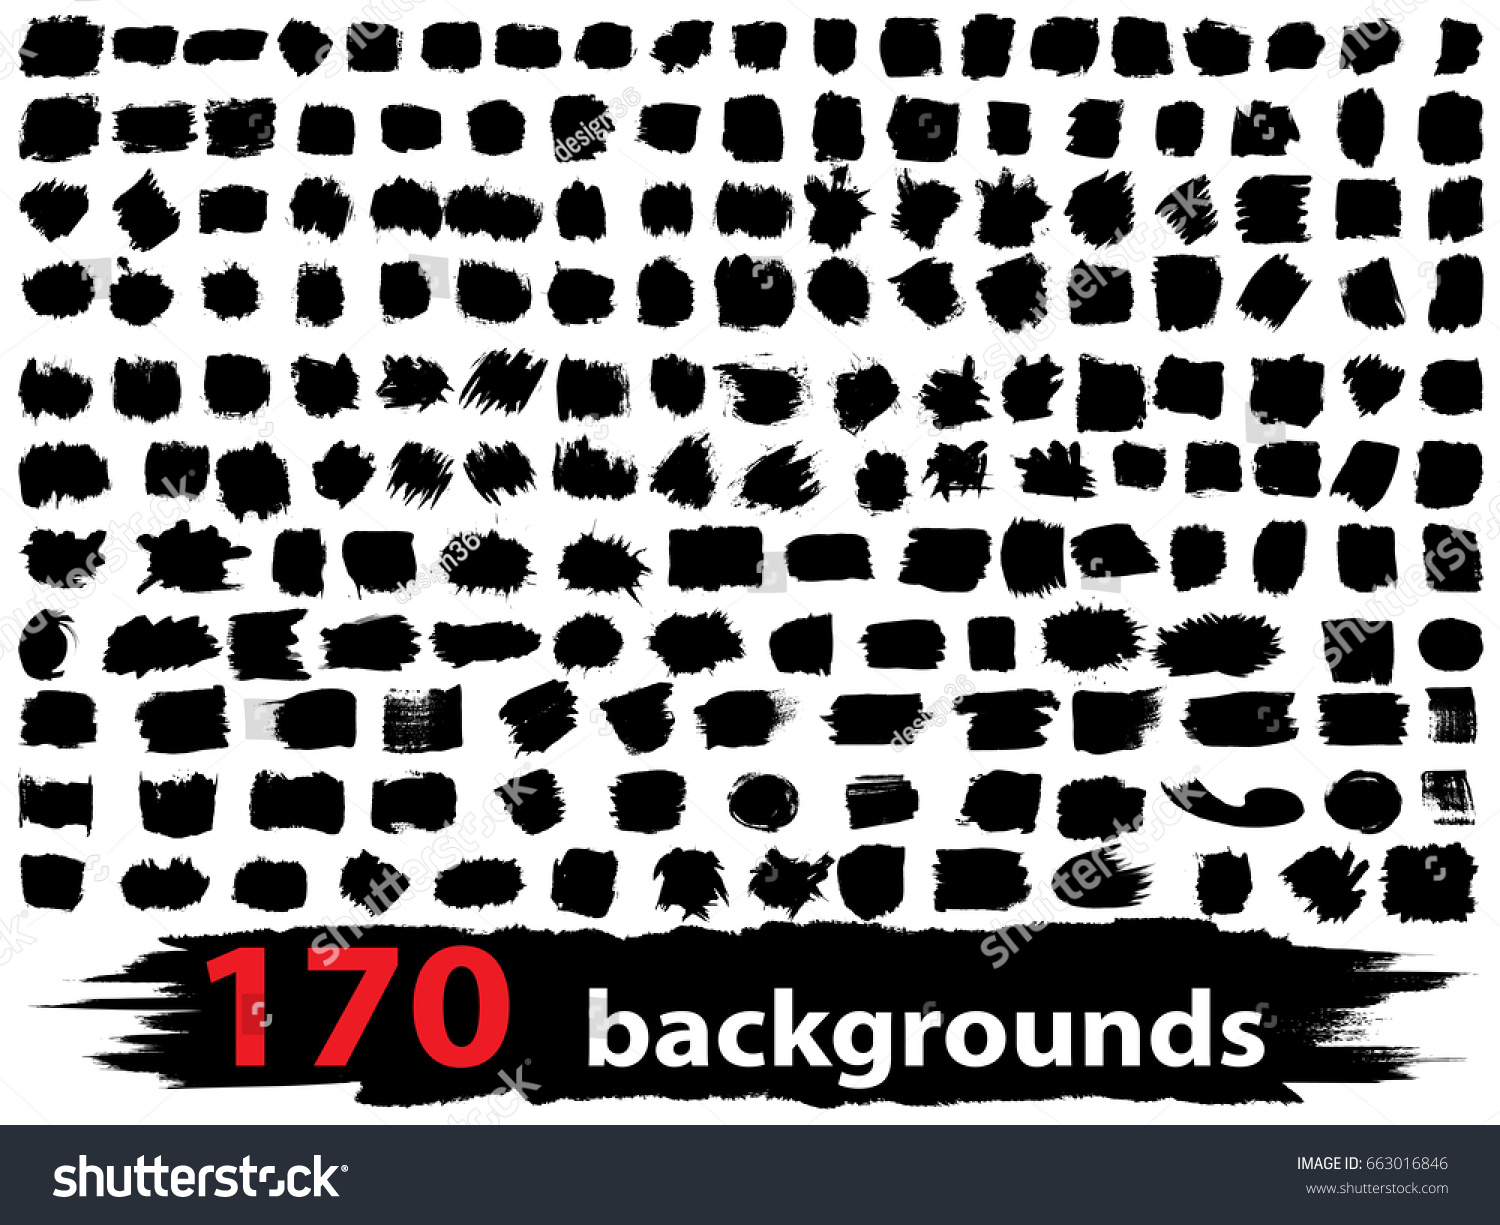 Very large collection or set of 170 artistic black paint or ink hand made creative brush stroke backgrounds isolated on white as grunge or grungy art, education abstract elements frame design #663016846